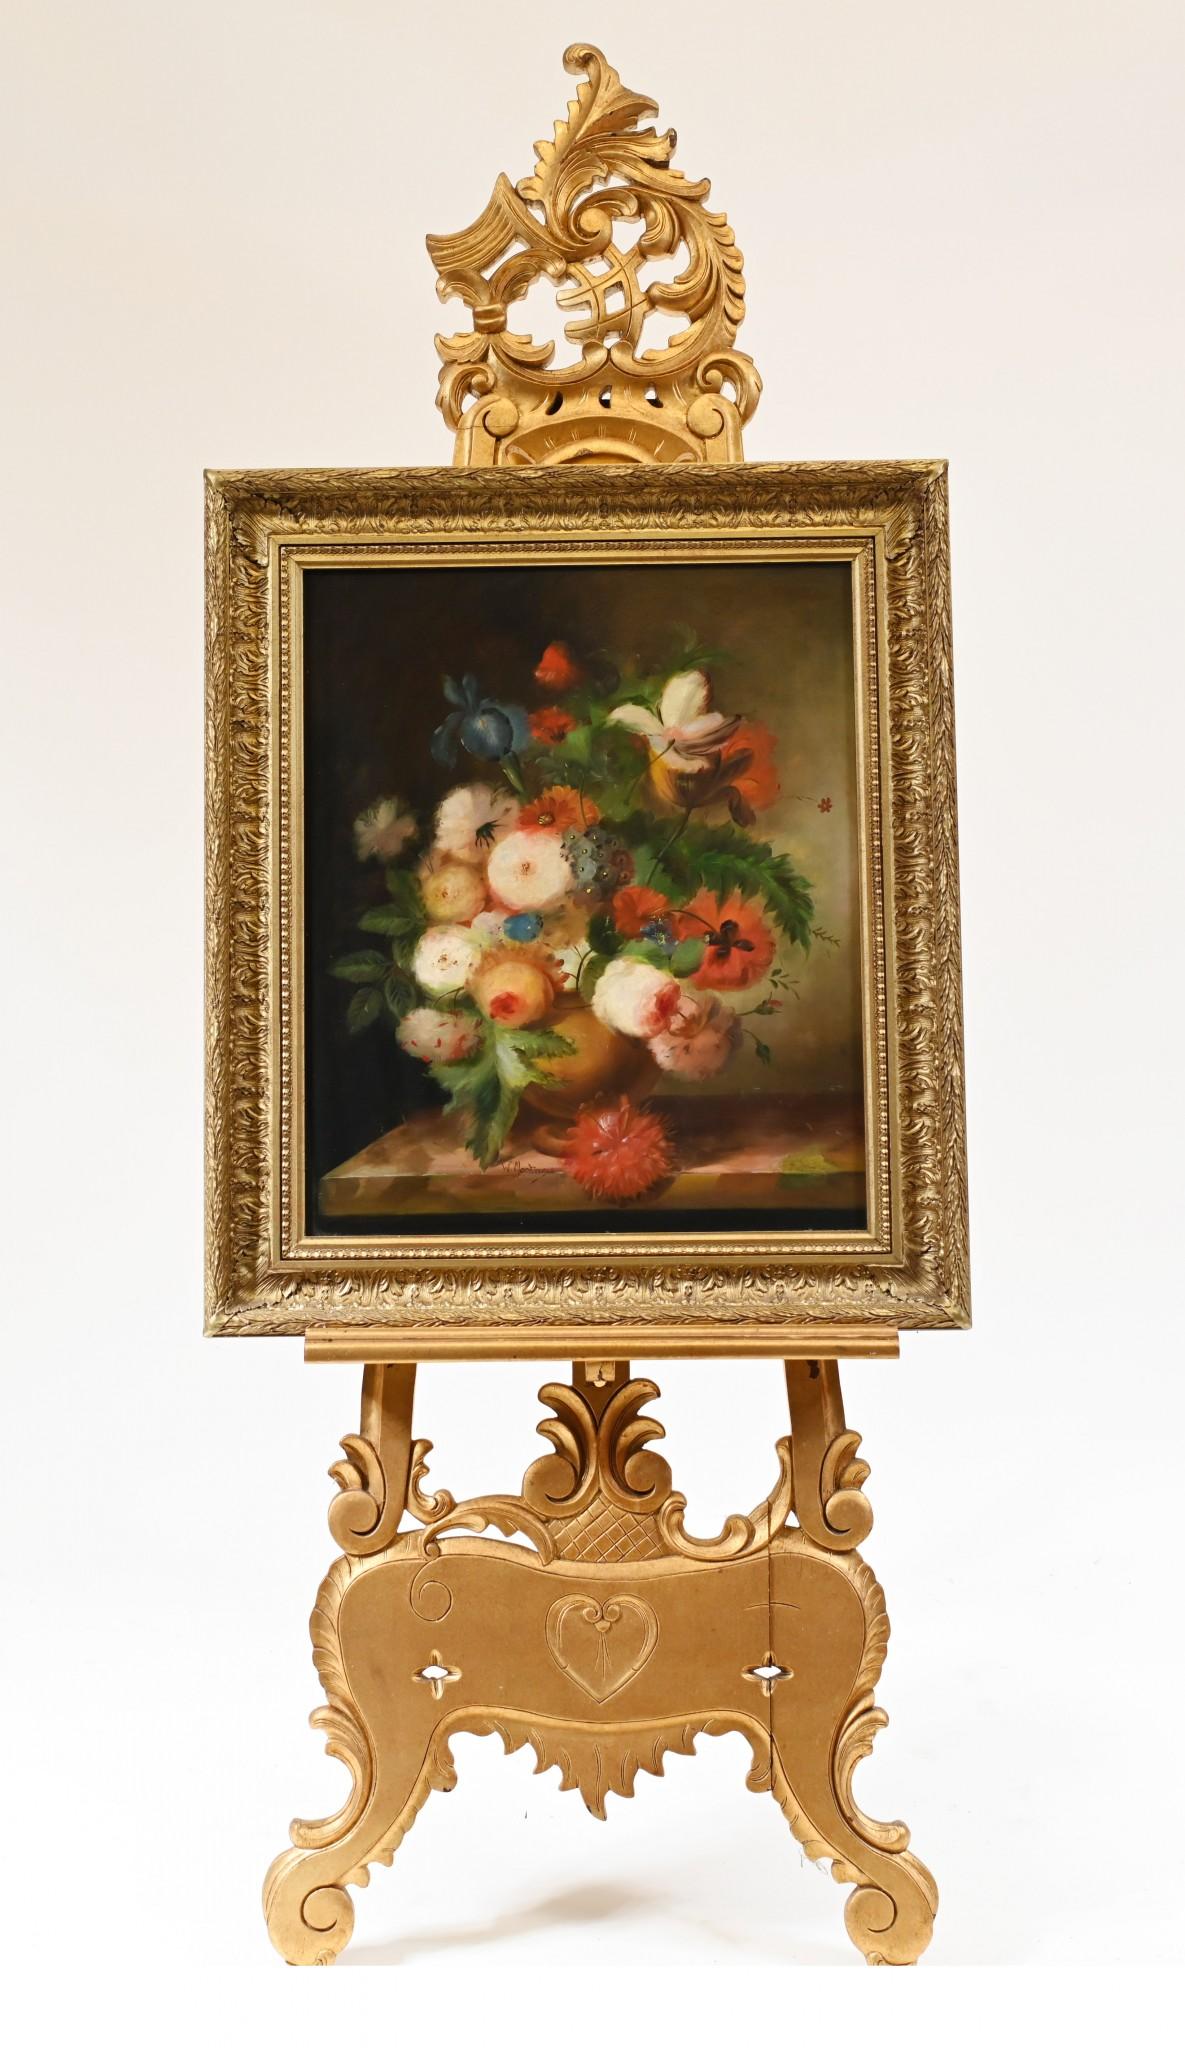 Very bright and breezy English oil painting of a vivid floral still life
Brush work is amazingly detailed, very talented hand
Comes in the wonderful gilt frame
Great collectors piece, something to brighten up any interior
Some of our items are in